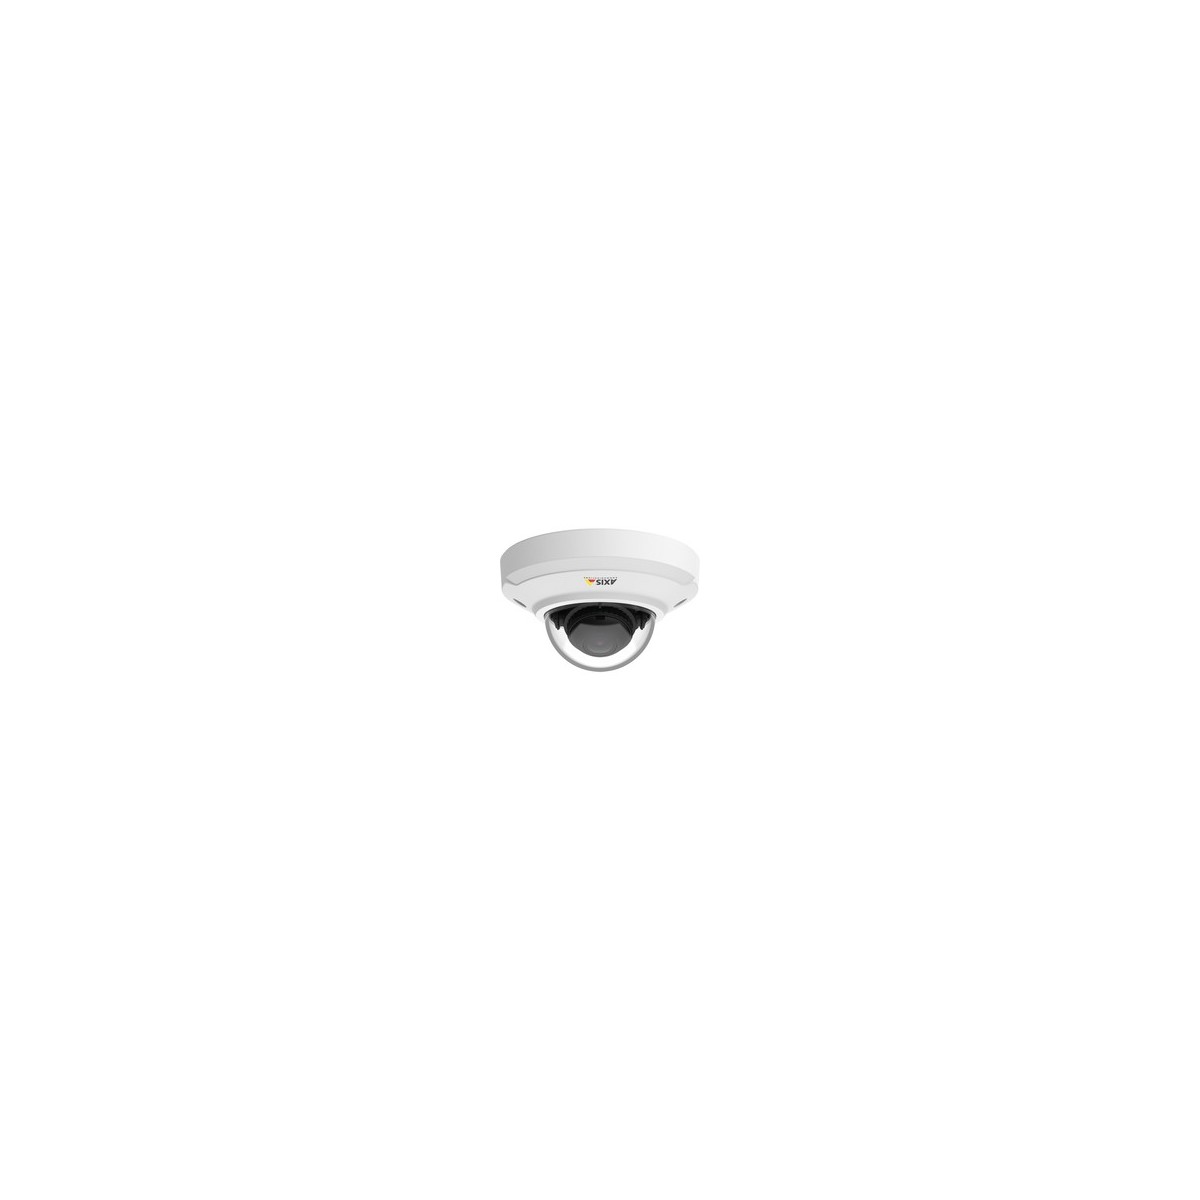 Axis M3046-V - IP security camera - Indoor - Wired - Simplified Chinese - German - English - Spanish - French - Italian - Japane